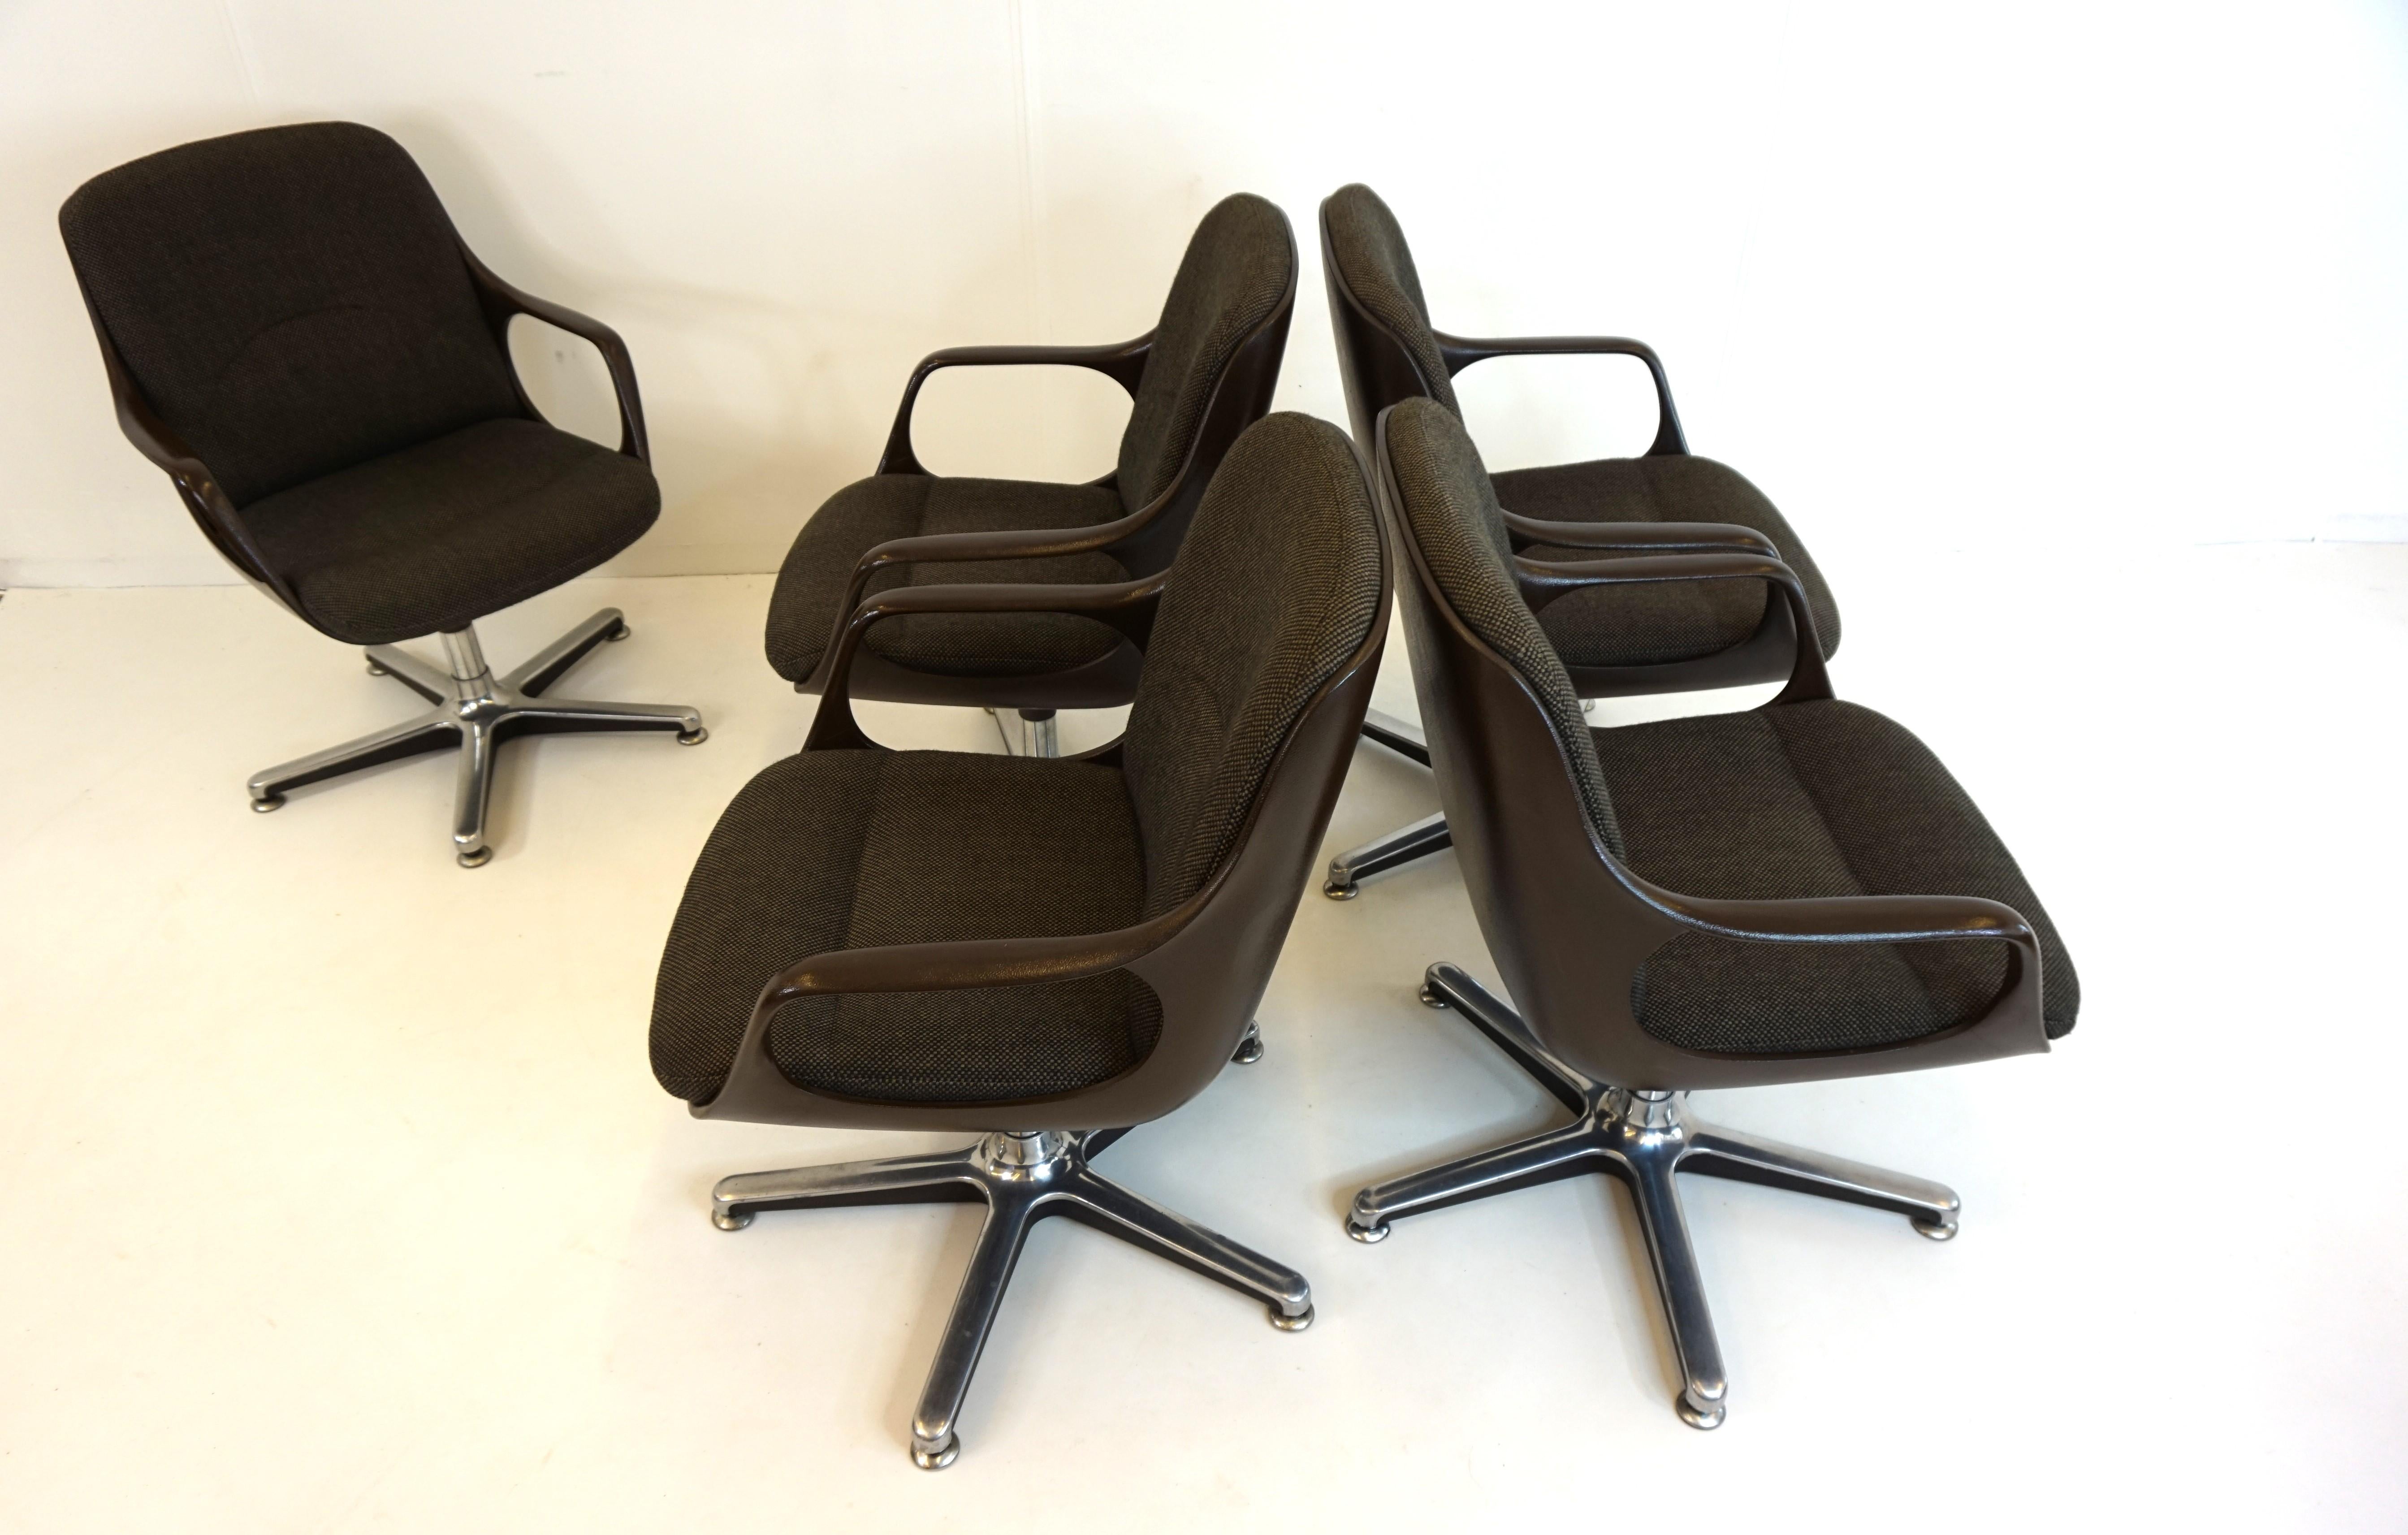 Chromcraft Set of 5 Space Age Office/Dining Room Chairs 14